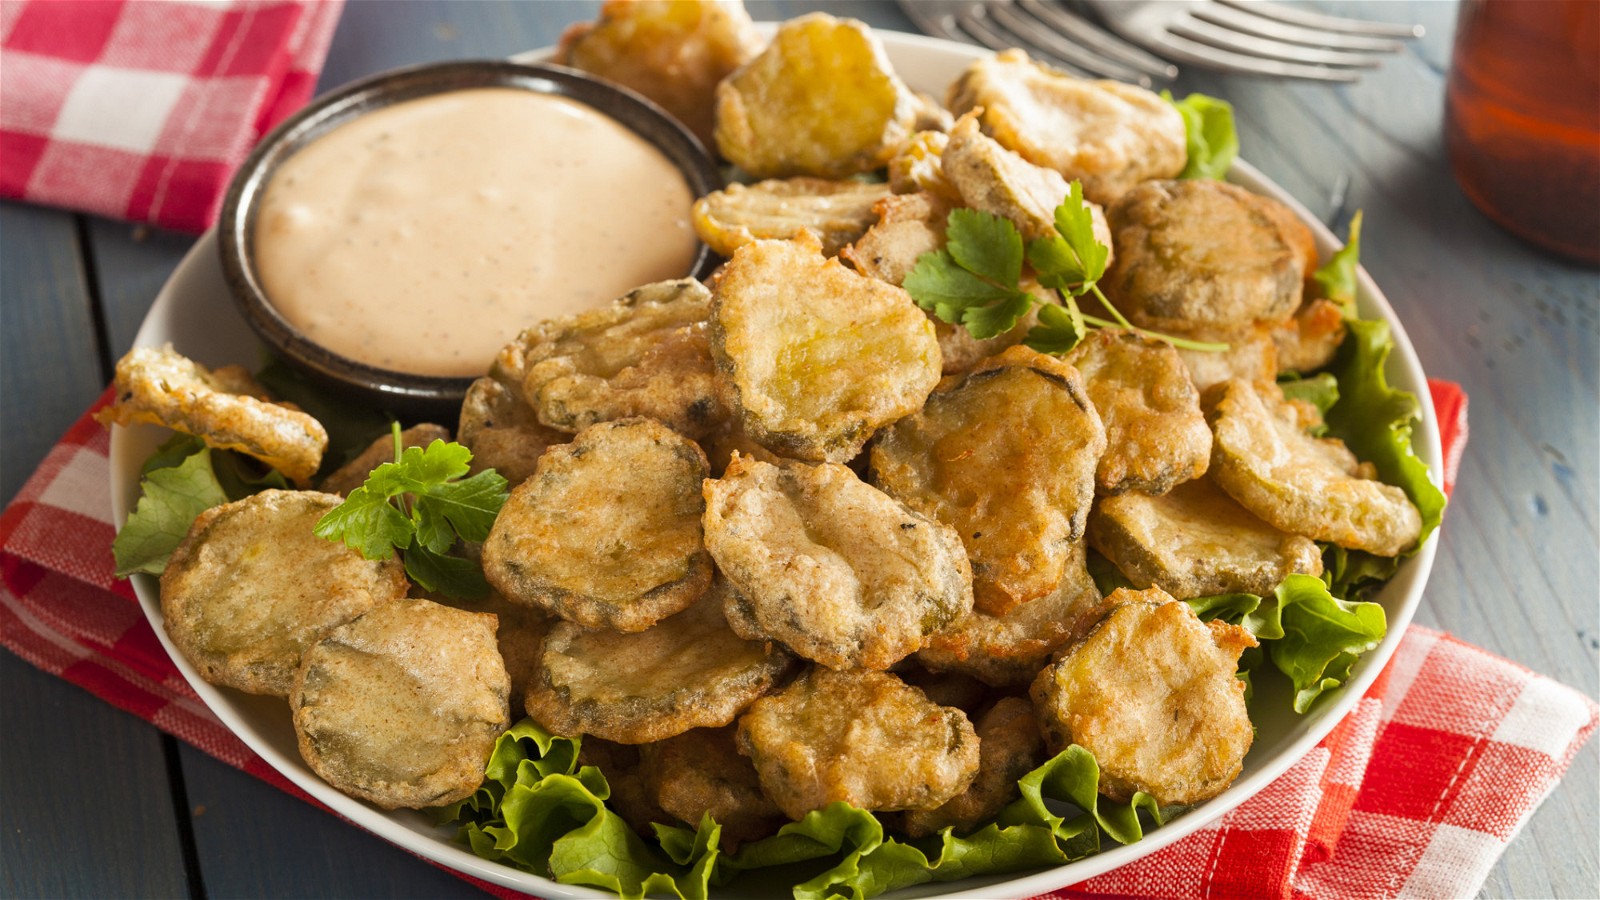 Fried Pickles with Cajun Dipping Sauce – Duke's Mayo